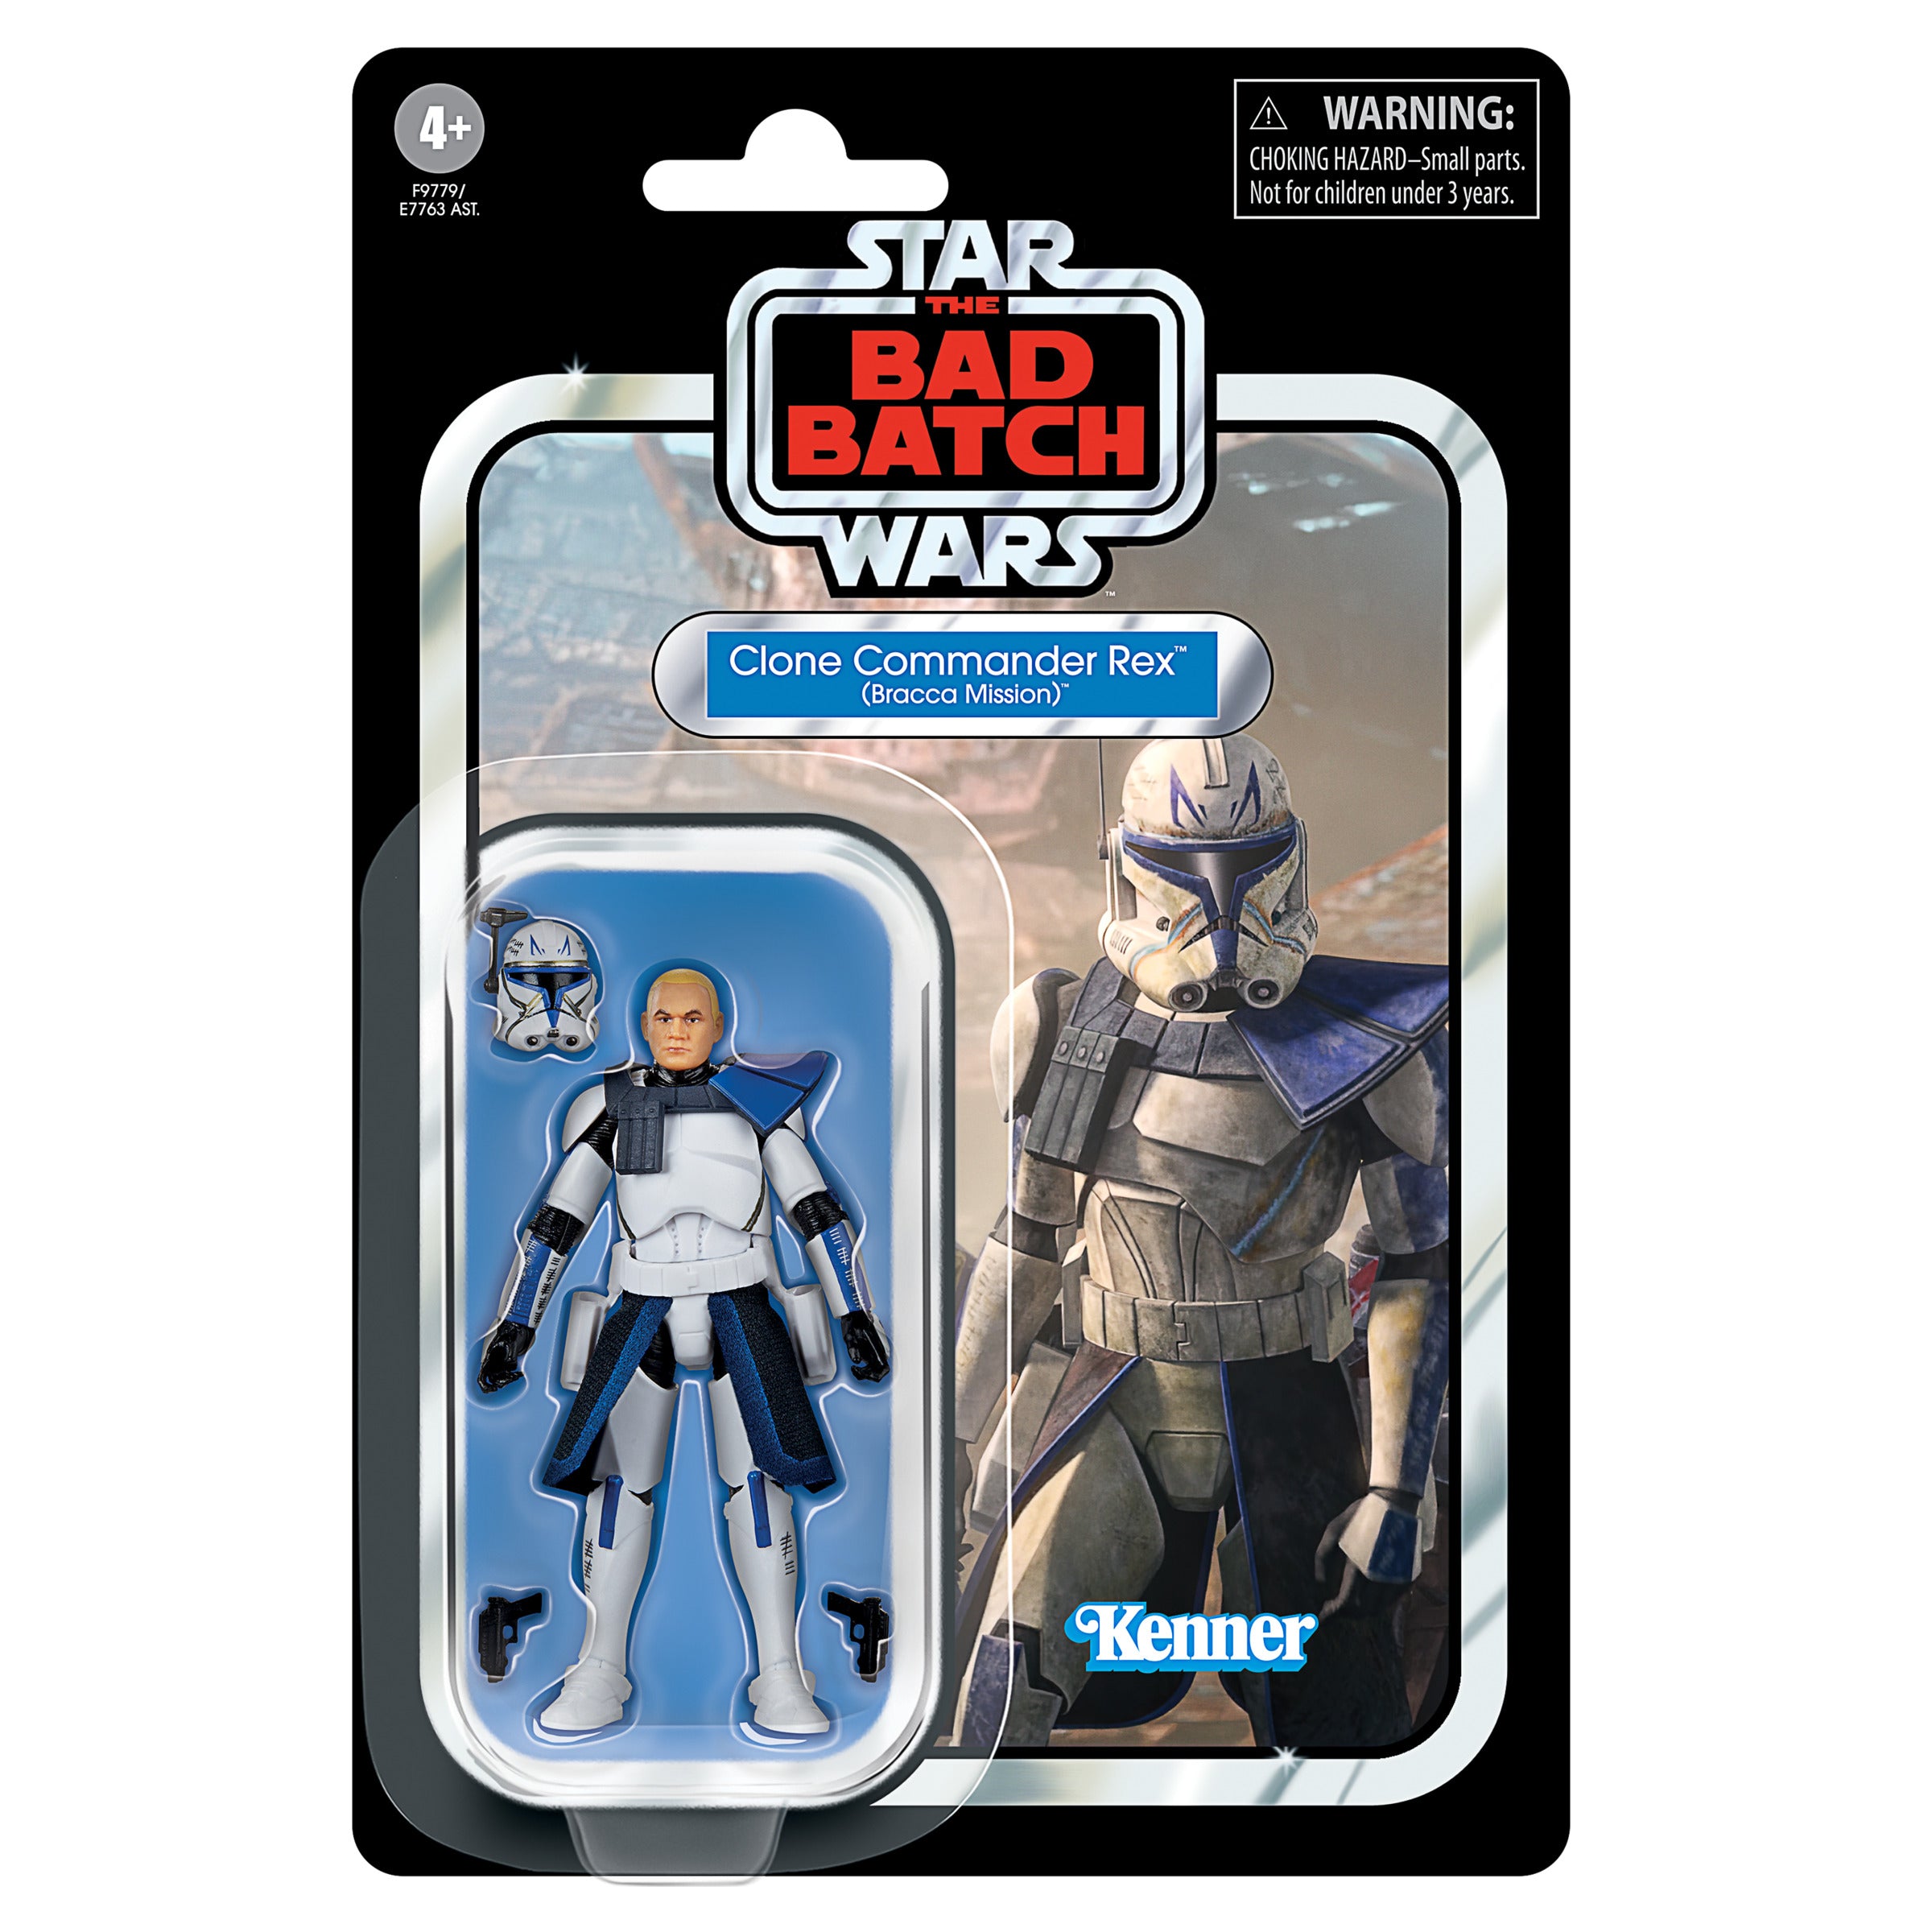 Star Wars The Vintage Collection: The Bad Batch - Comandante Rex Mision Bracca